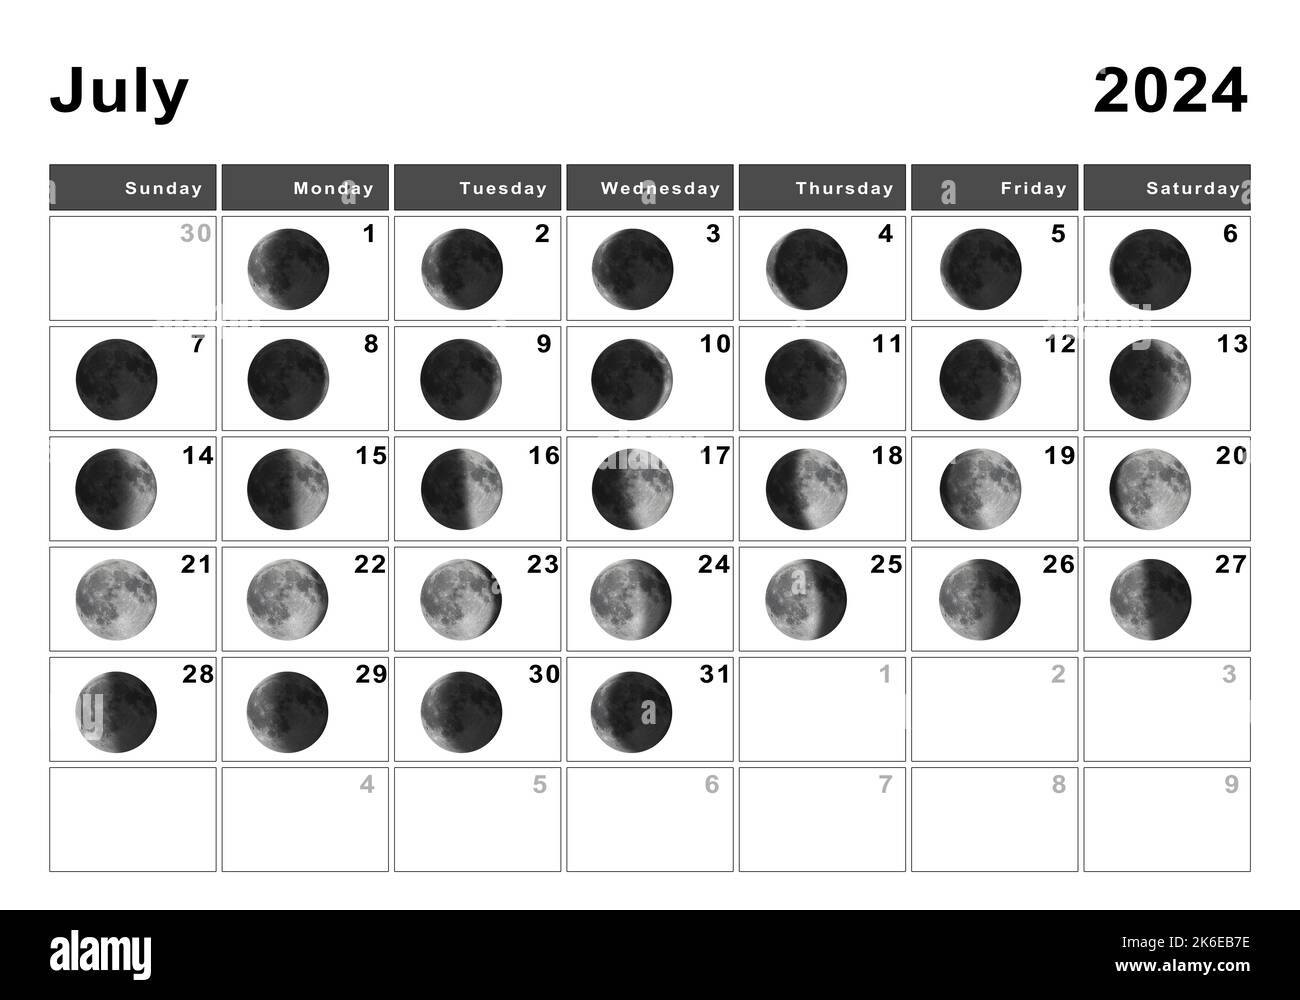 July 2024 Lunar Calendar, Moon Cycles, Moon Phases Stock Photo - Alamy intended for July 15Th Lunar Calendar 2024